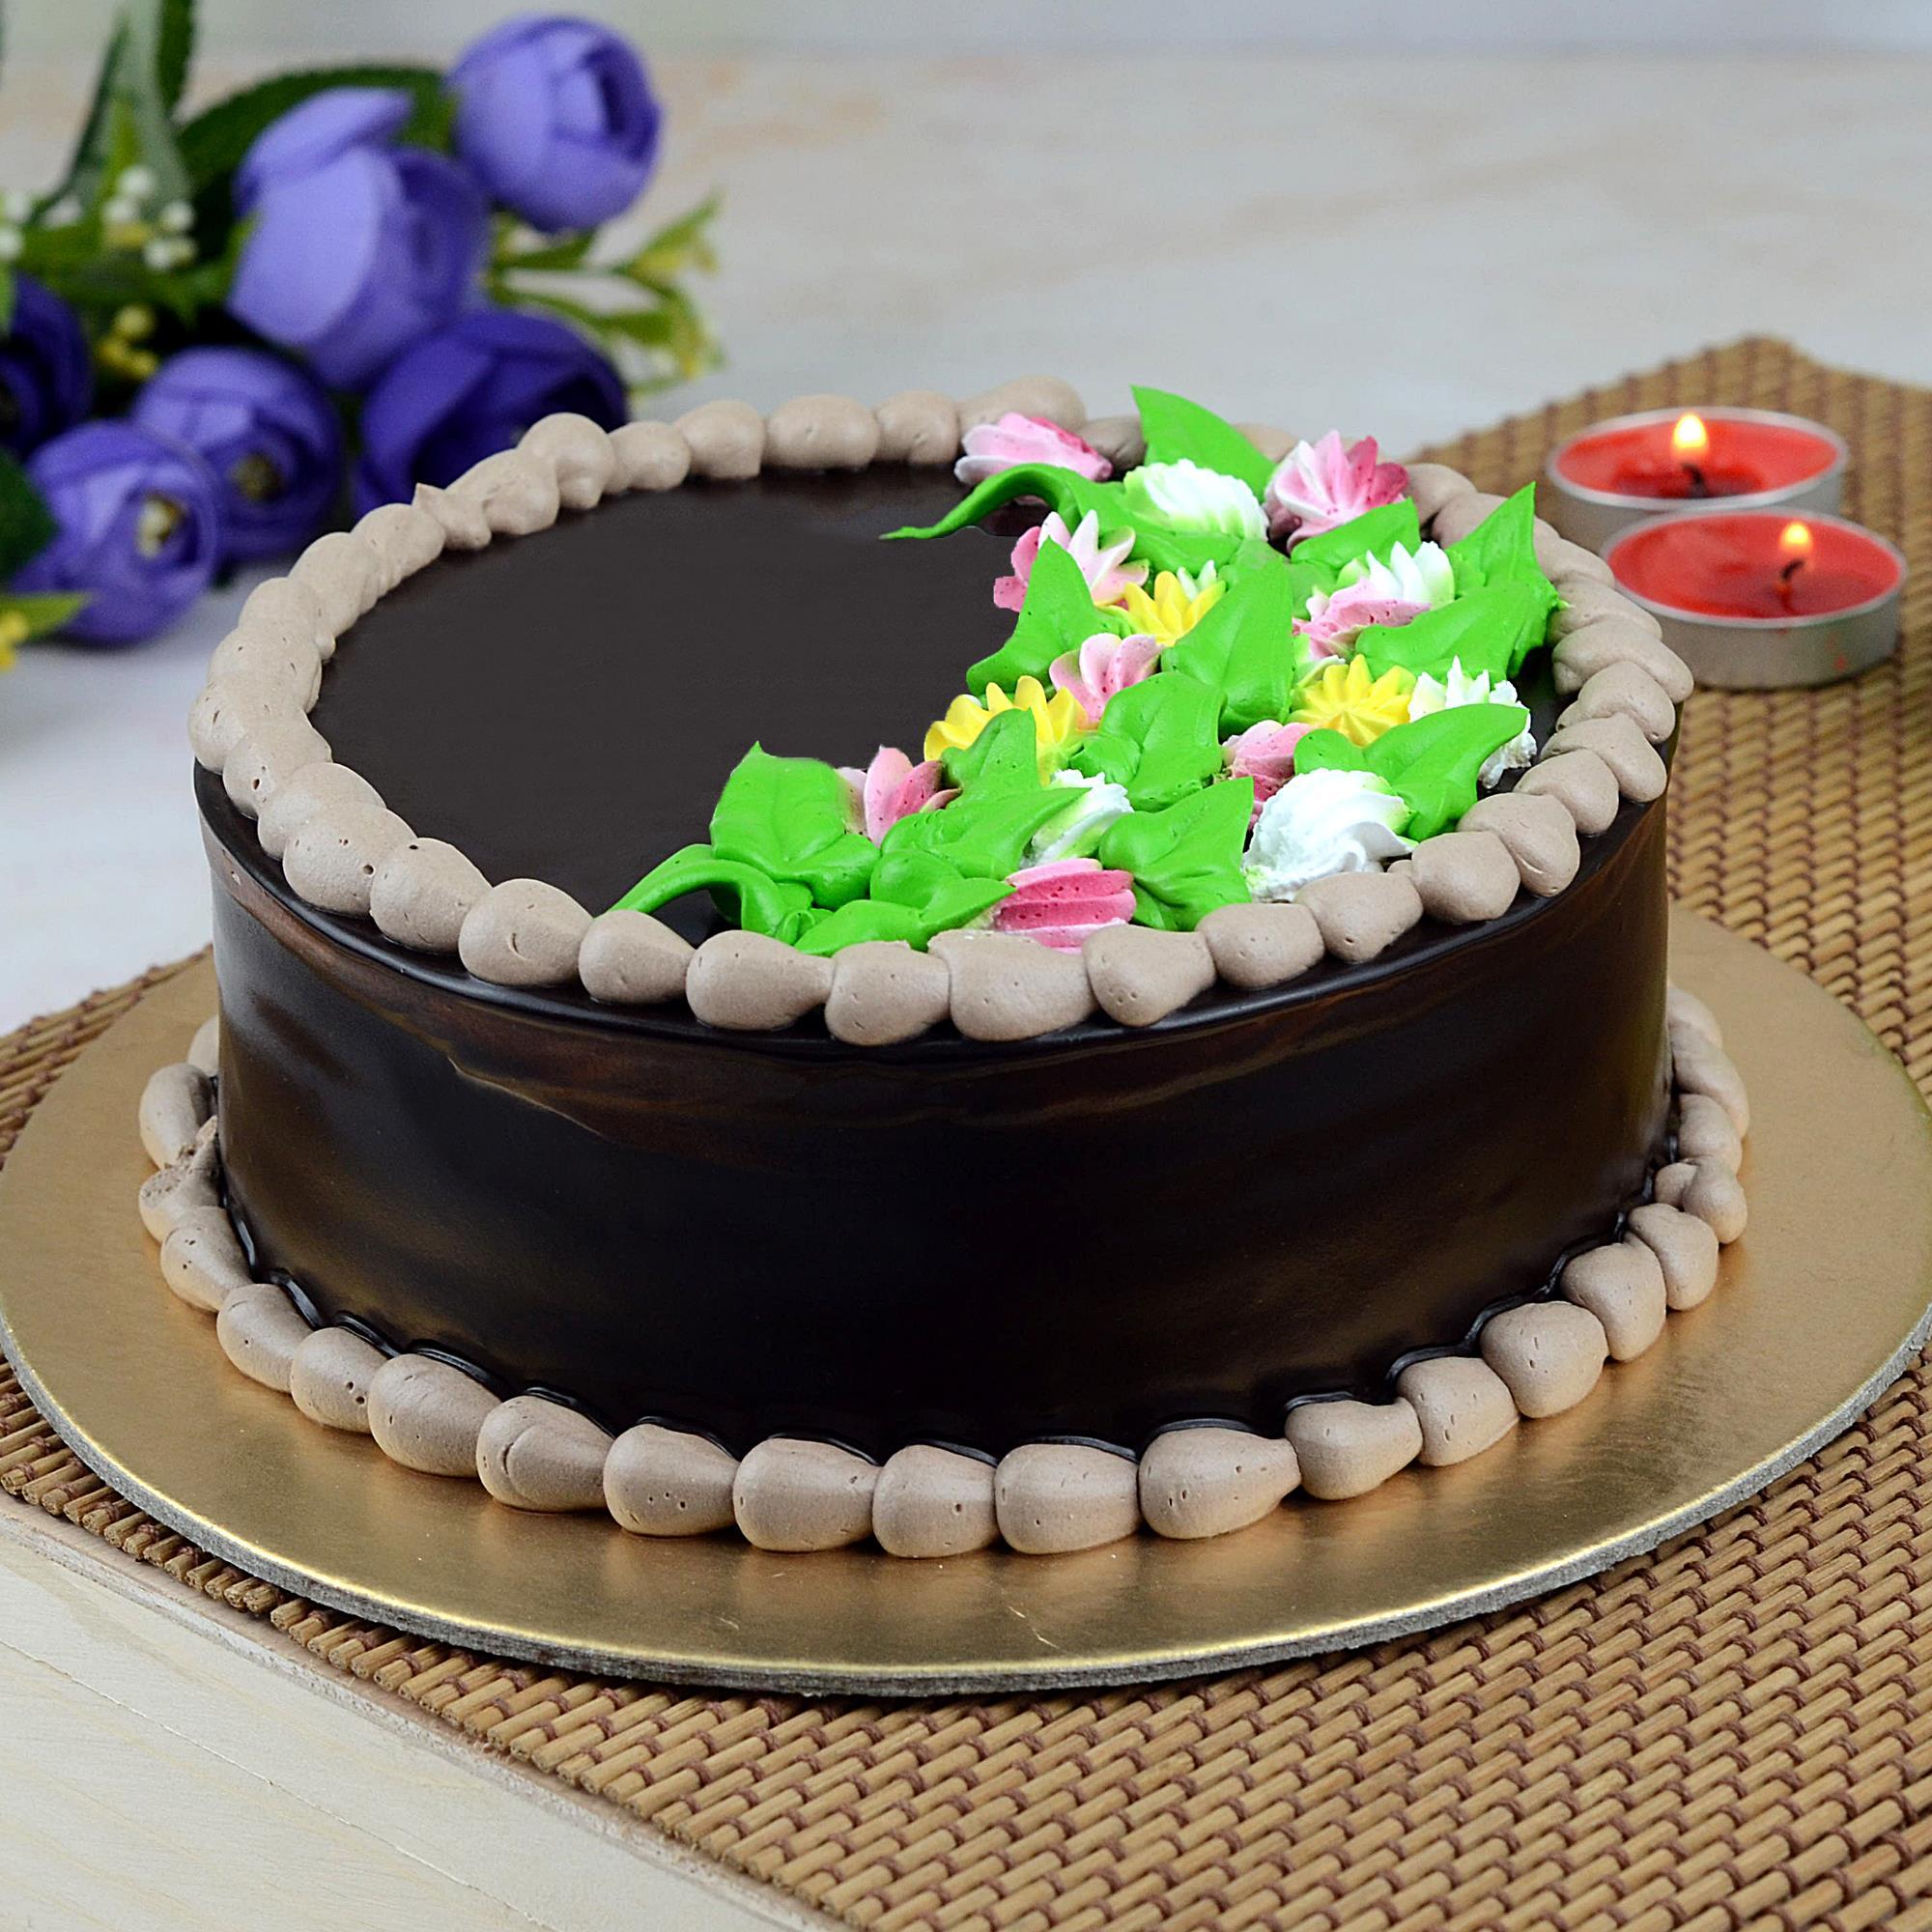 Order Cake with Cup Cakes Online @ Rs. 2799 - SendBestGift